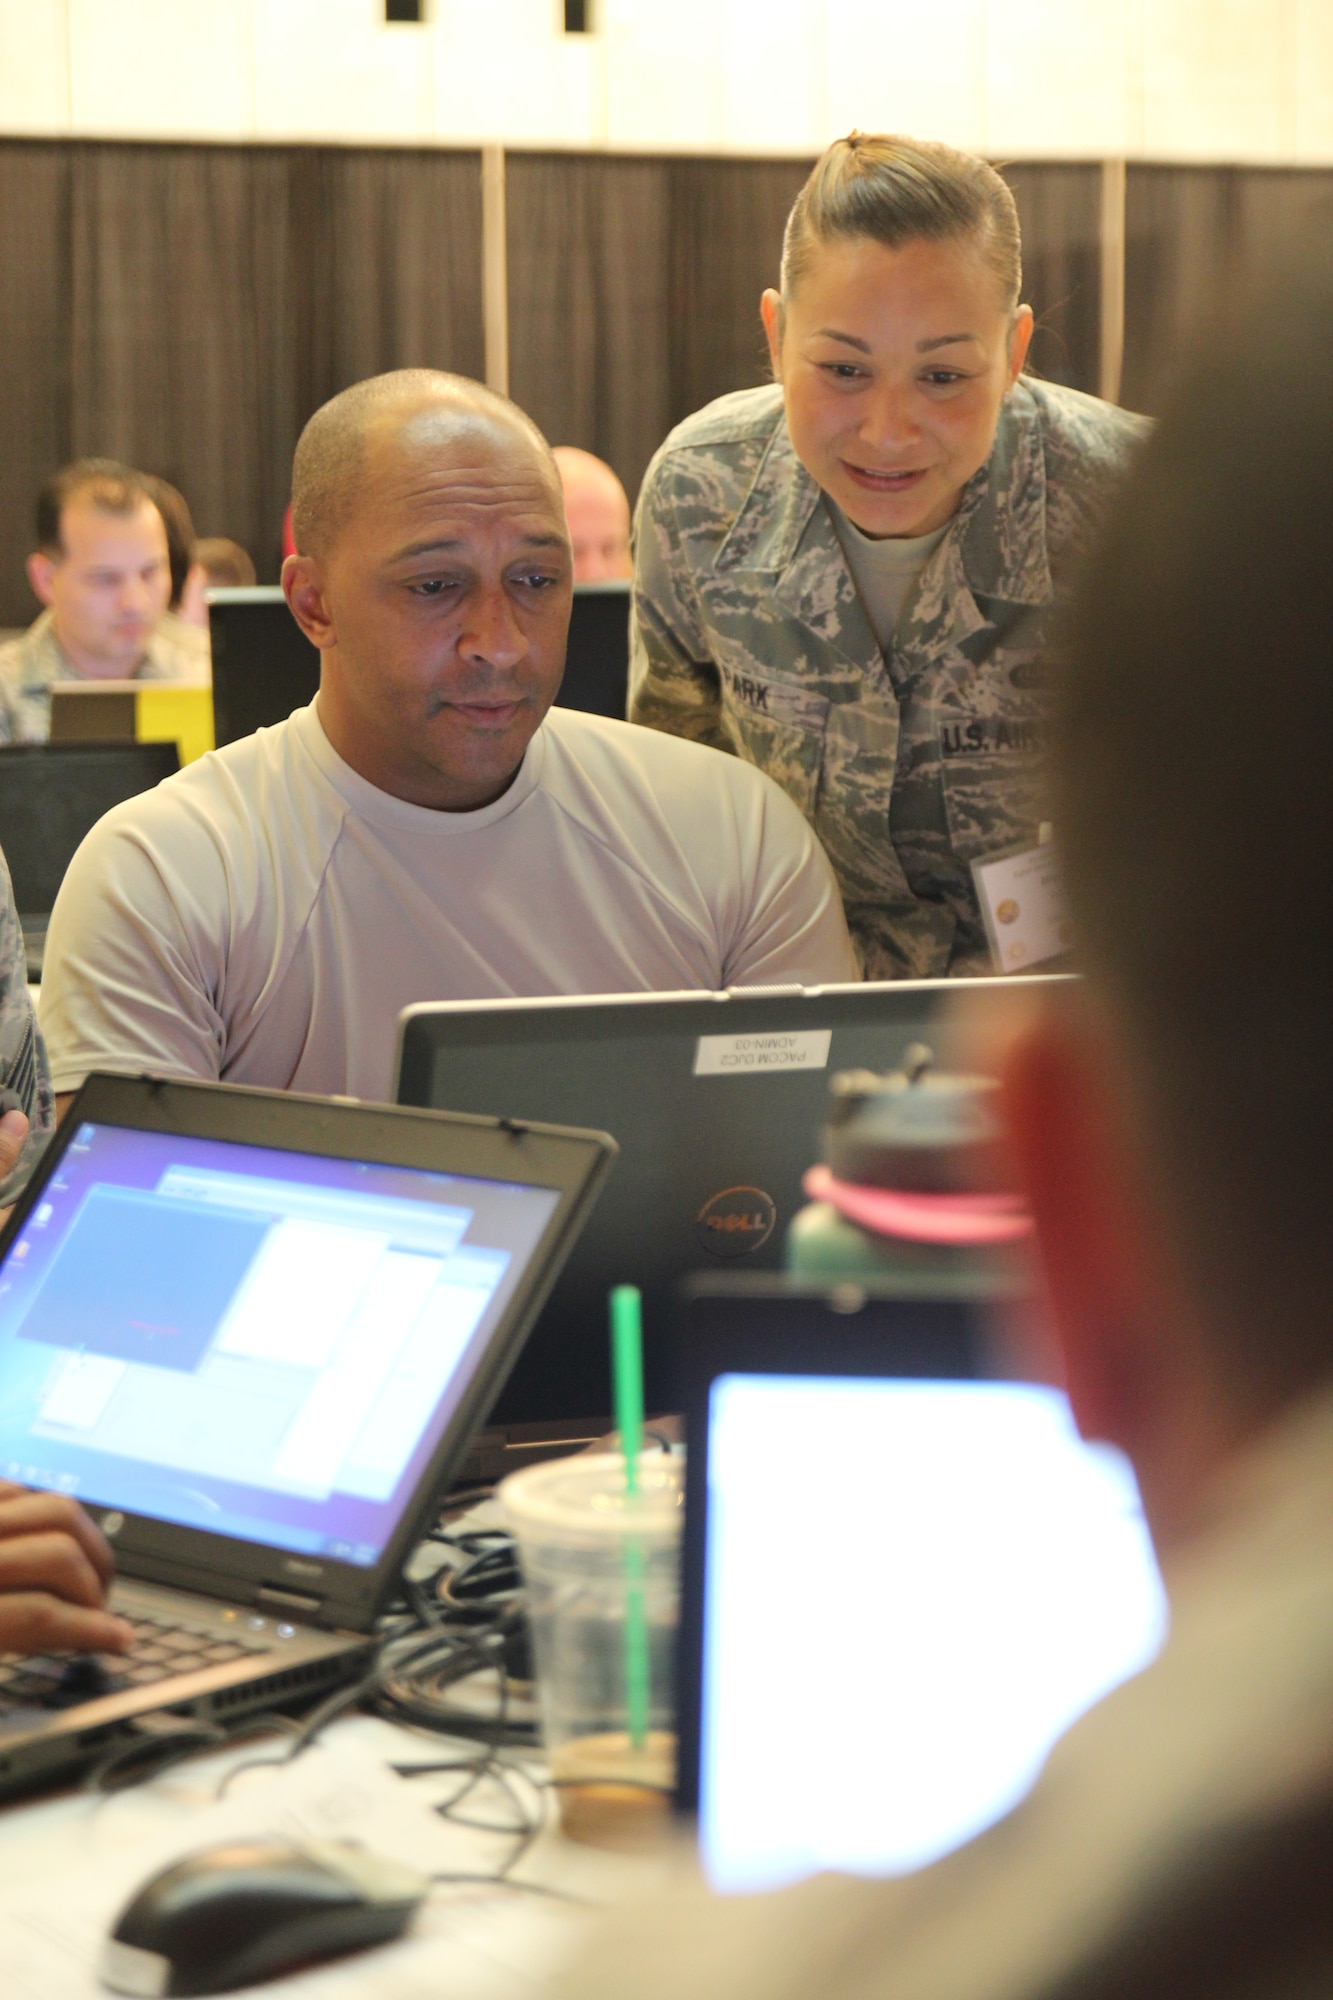 Senior Airman Jasper Green, from the 292nd Combat Communications Squadron, and Master Sgt. Misty Park, from the 209 Air Operations Group, Hawaii Air National Guard, attempt to resolve a cyber attack during the Po’oihe 2015 Cyber Security Exercise at the University of Hawaii Manoa Campus Center Ballroom on June 4, 2015. The exercise is designed to provide a controlled learning environment to support collaboration and education amongst all participants. (U.S. Air National Guard photo by Airman 1st Class Robert Cabuco)